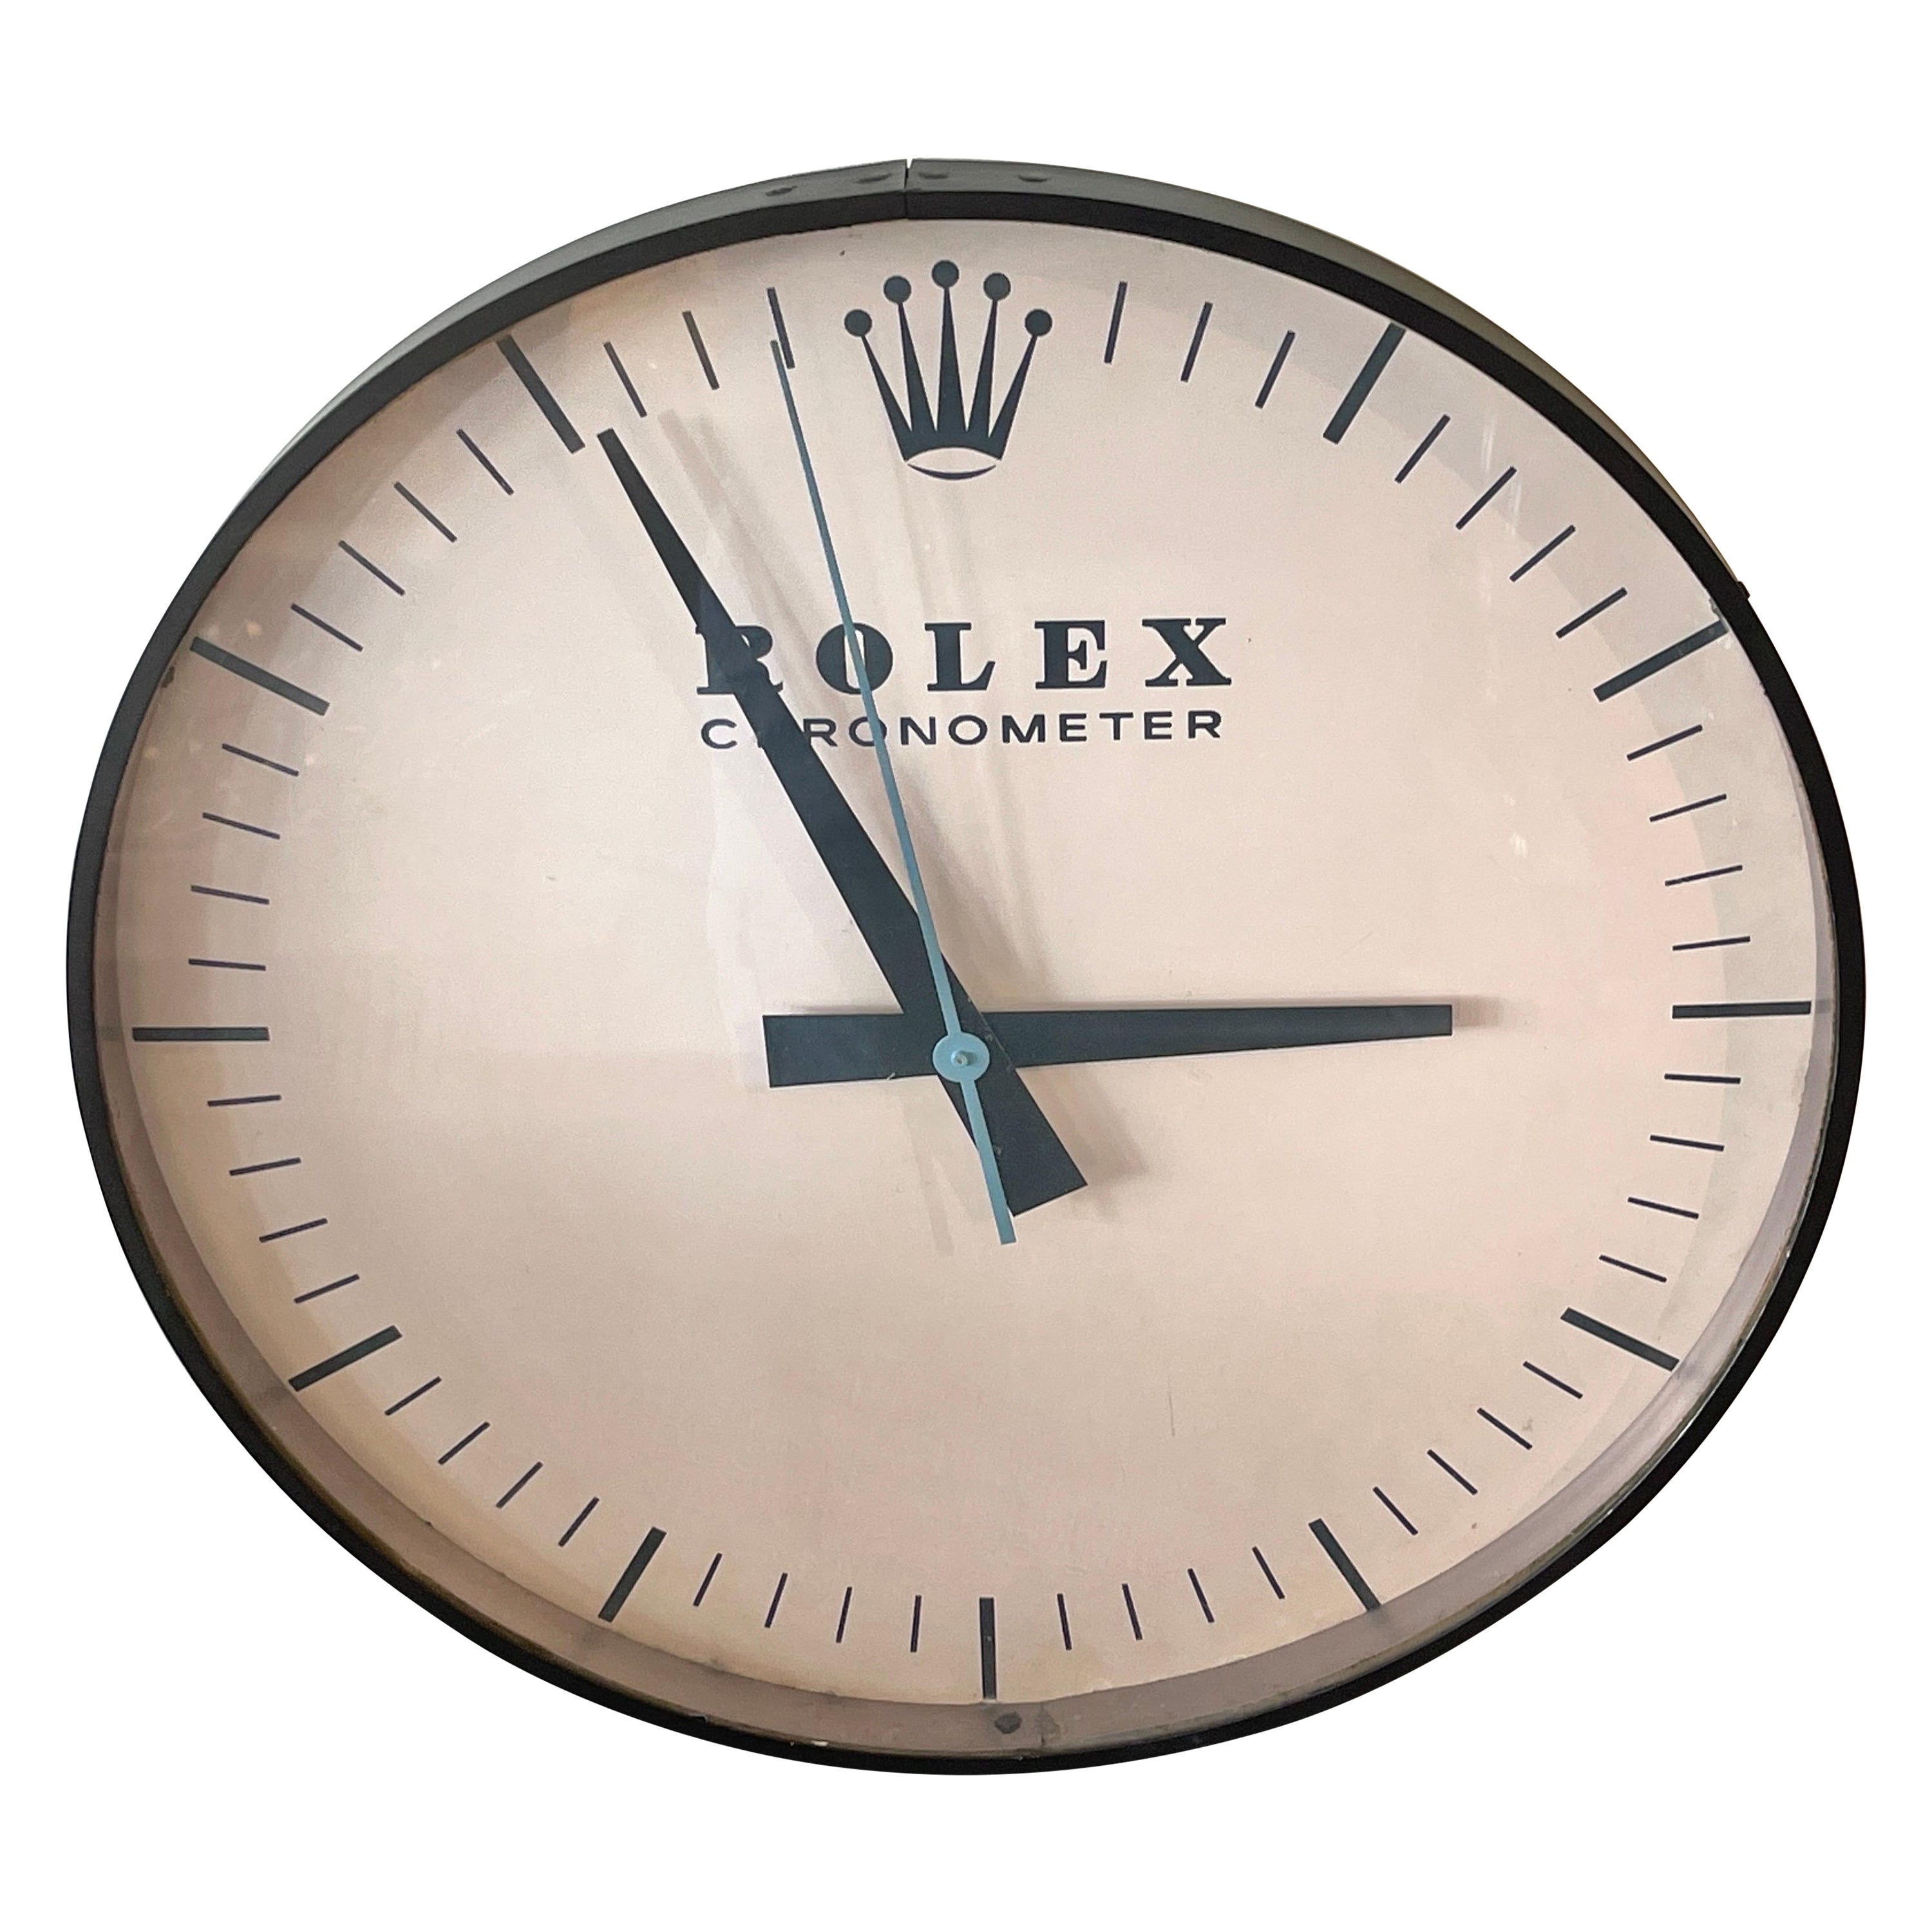 The Ohio Advertising Display for Rolex, Wall Clock